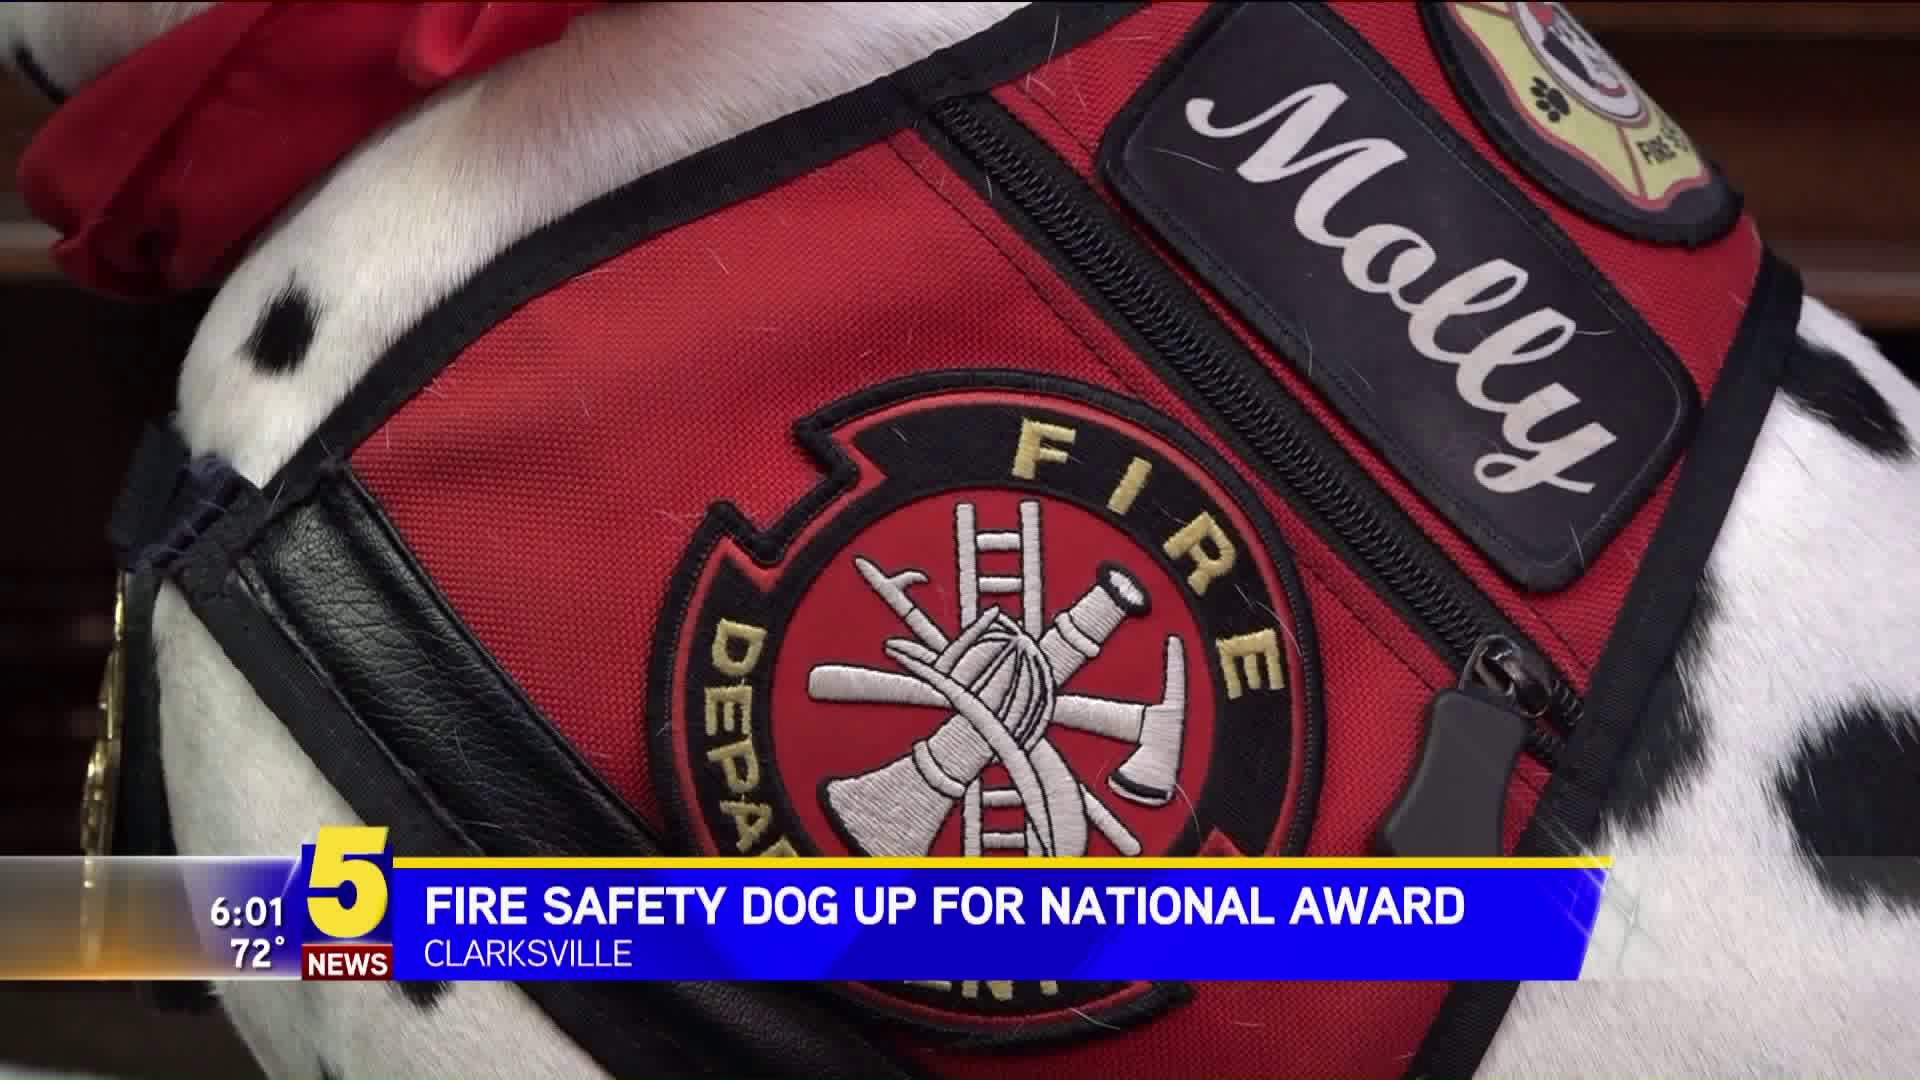 Molly The Fire Safety Dog Nominated For National Award